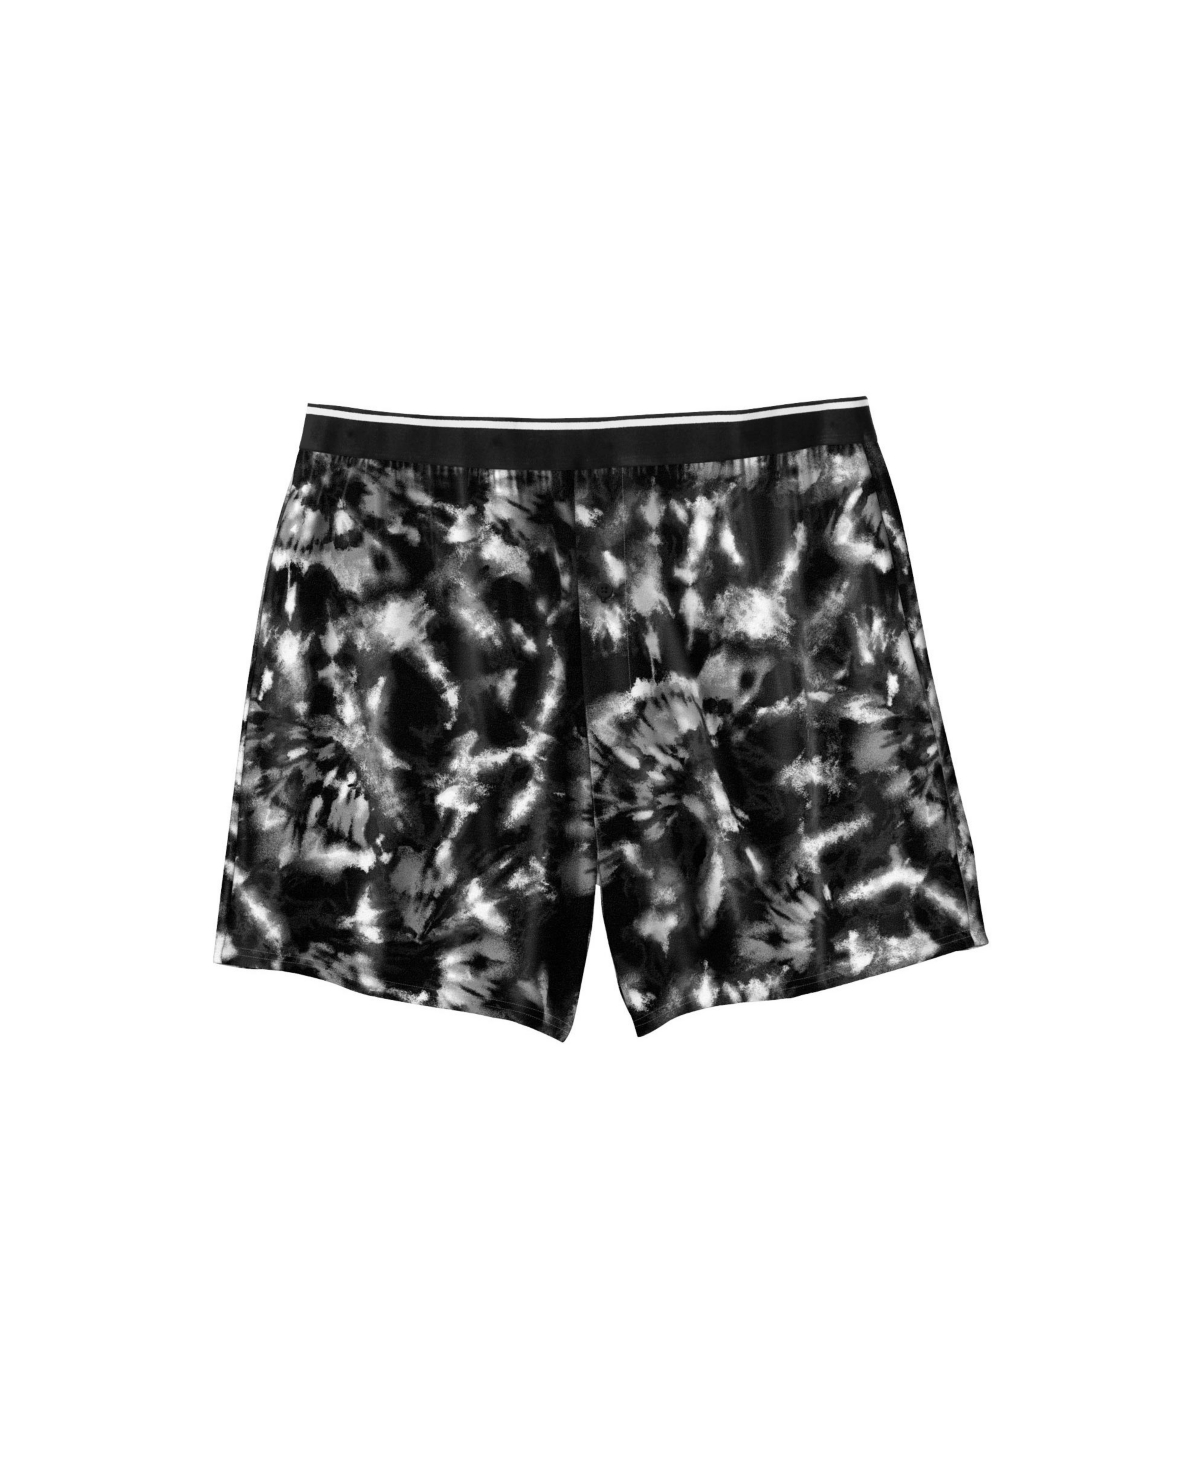 Big & Tall Patterned Boxers - Black marble